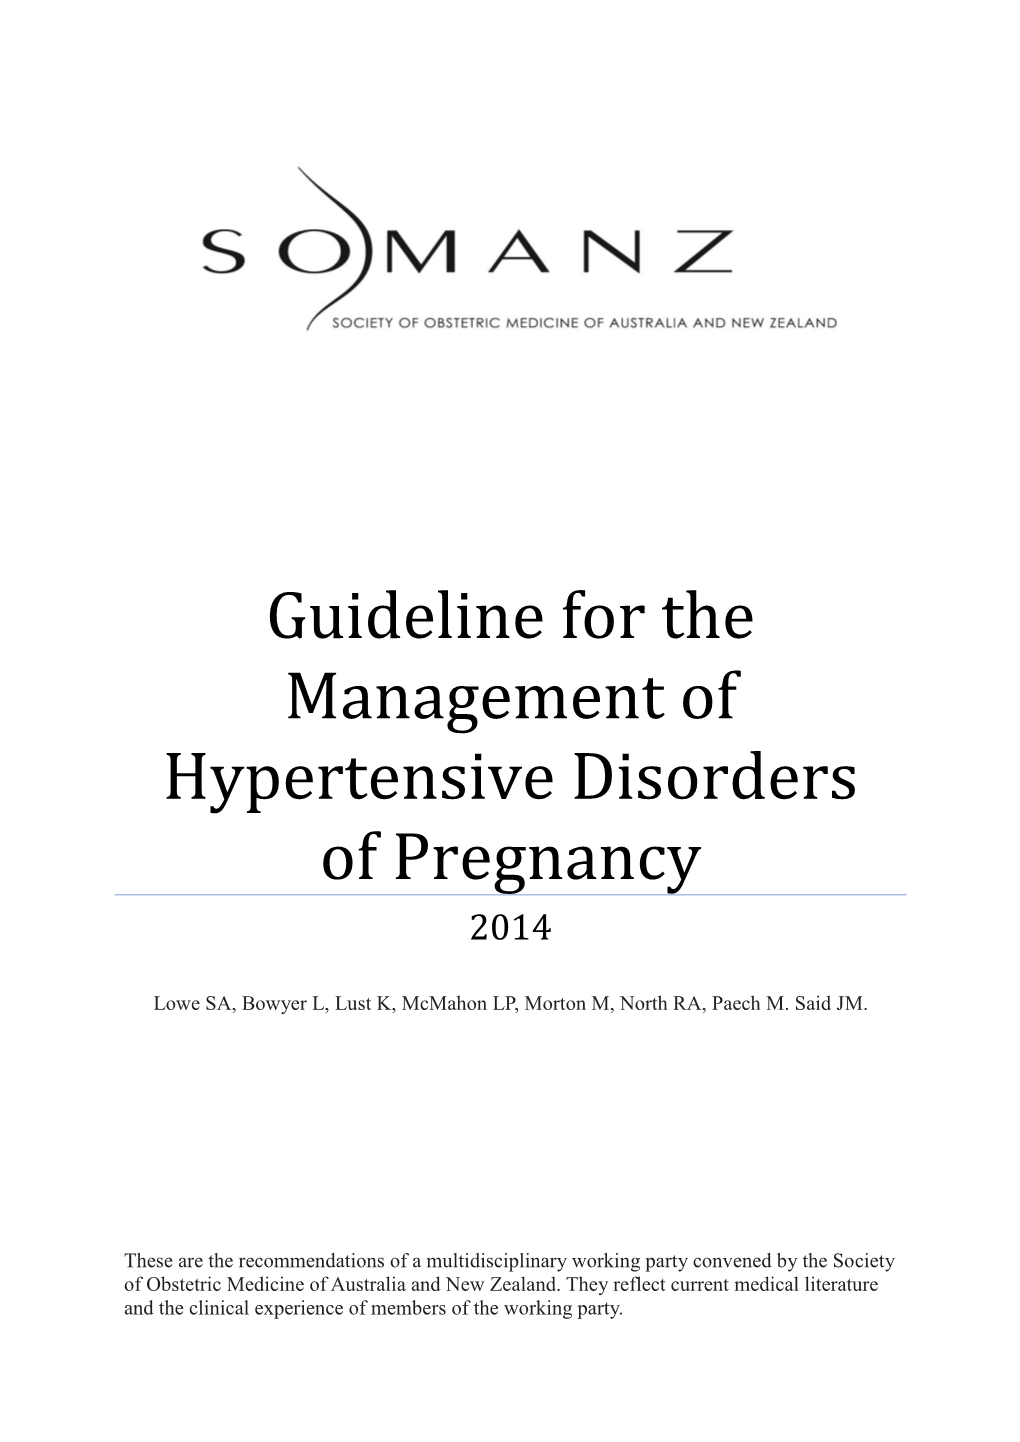 Guideline for the Management of Hypertensive Disorders of Pregnancy 2014